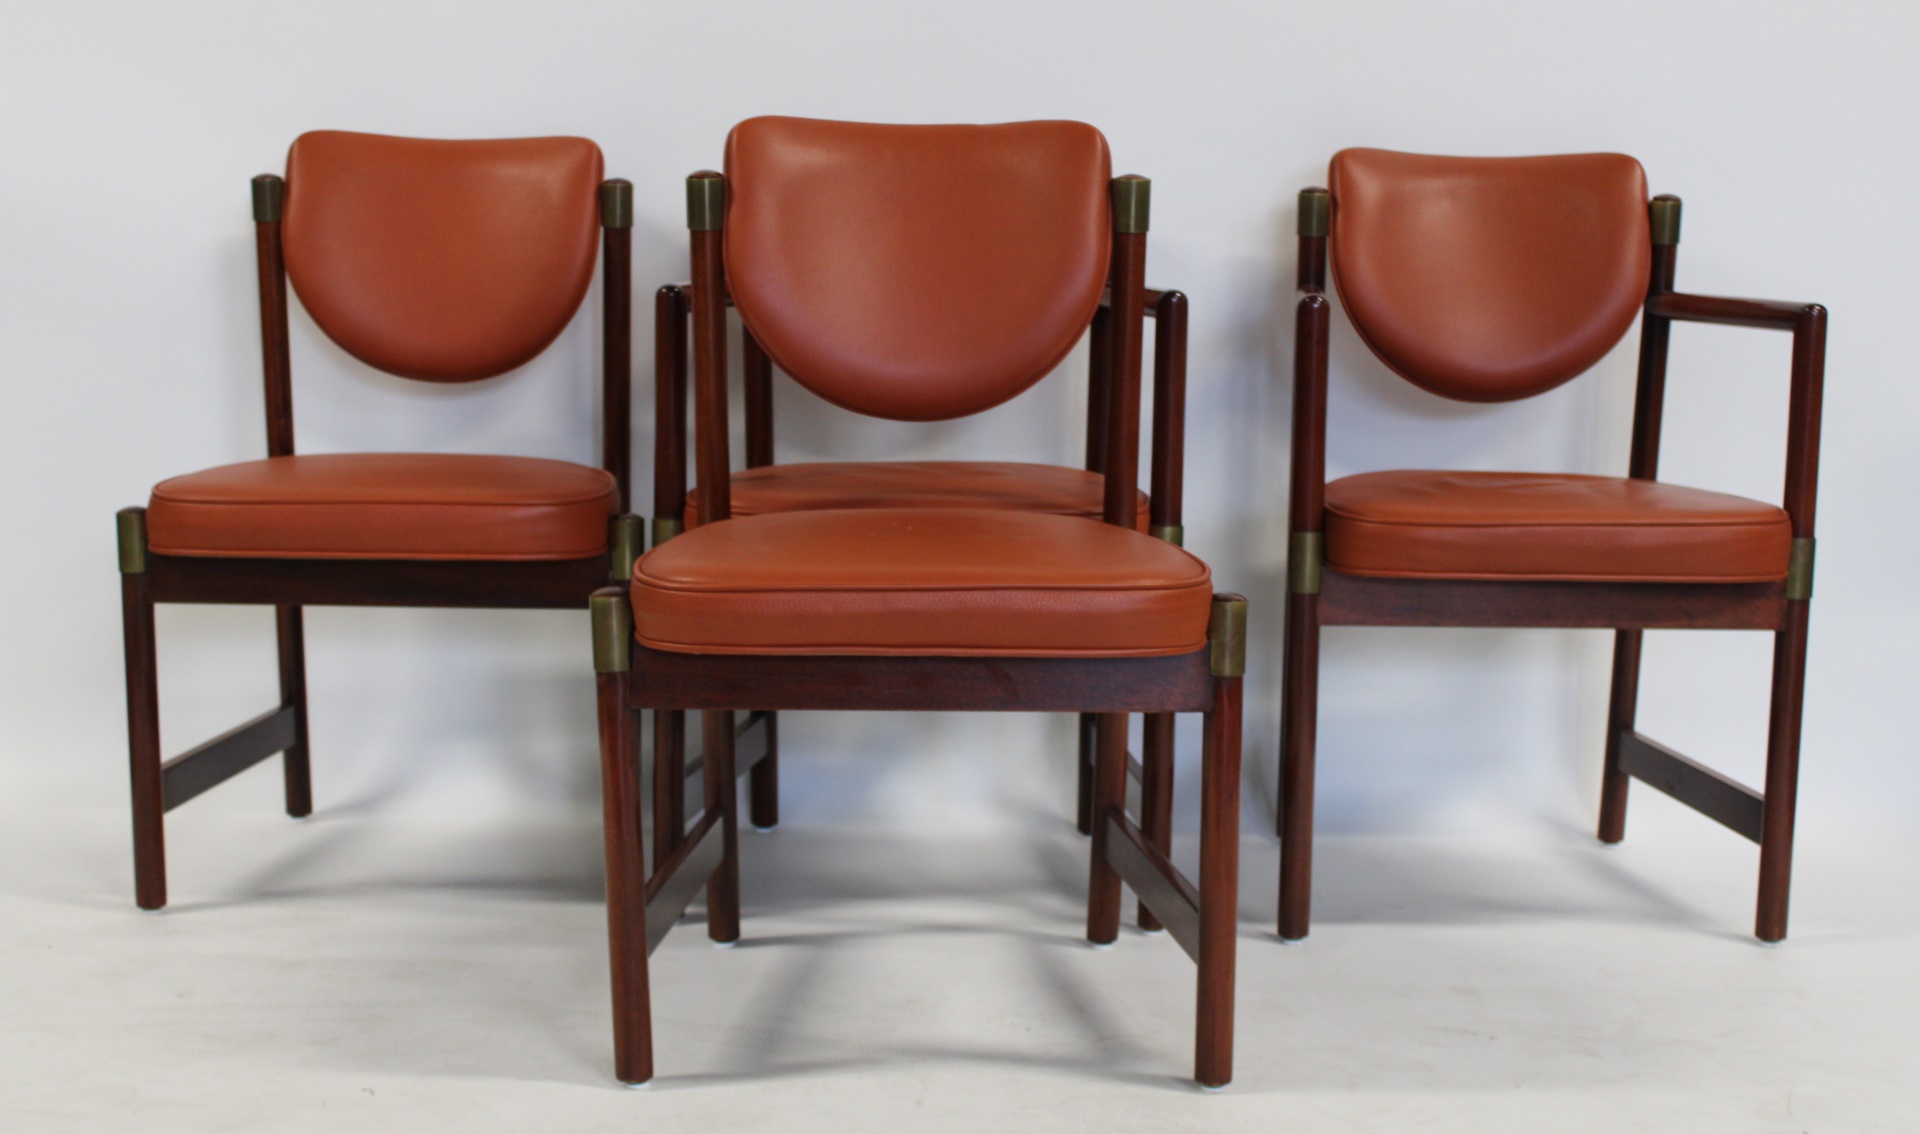 4 MIDCENTURY CHAIRS WITH BRASS